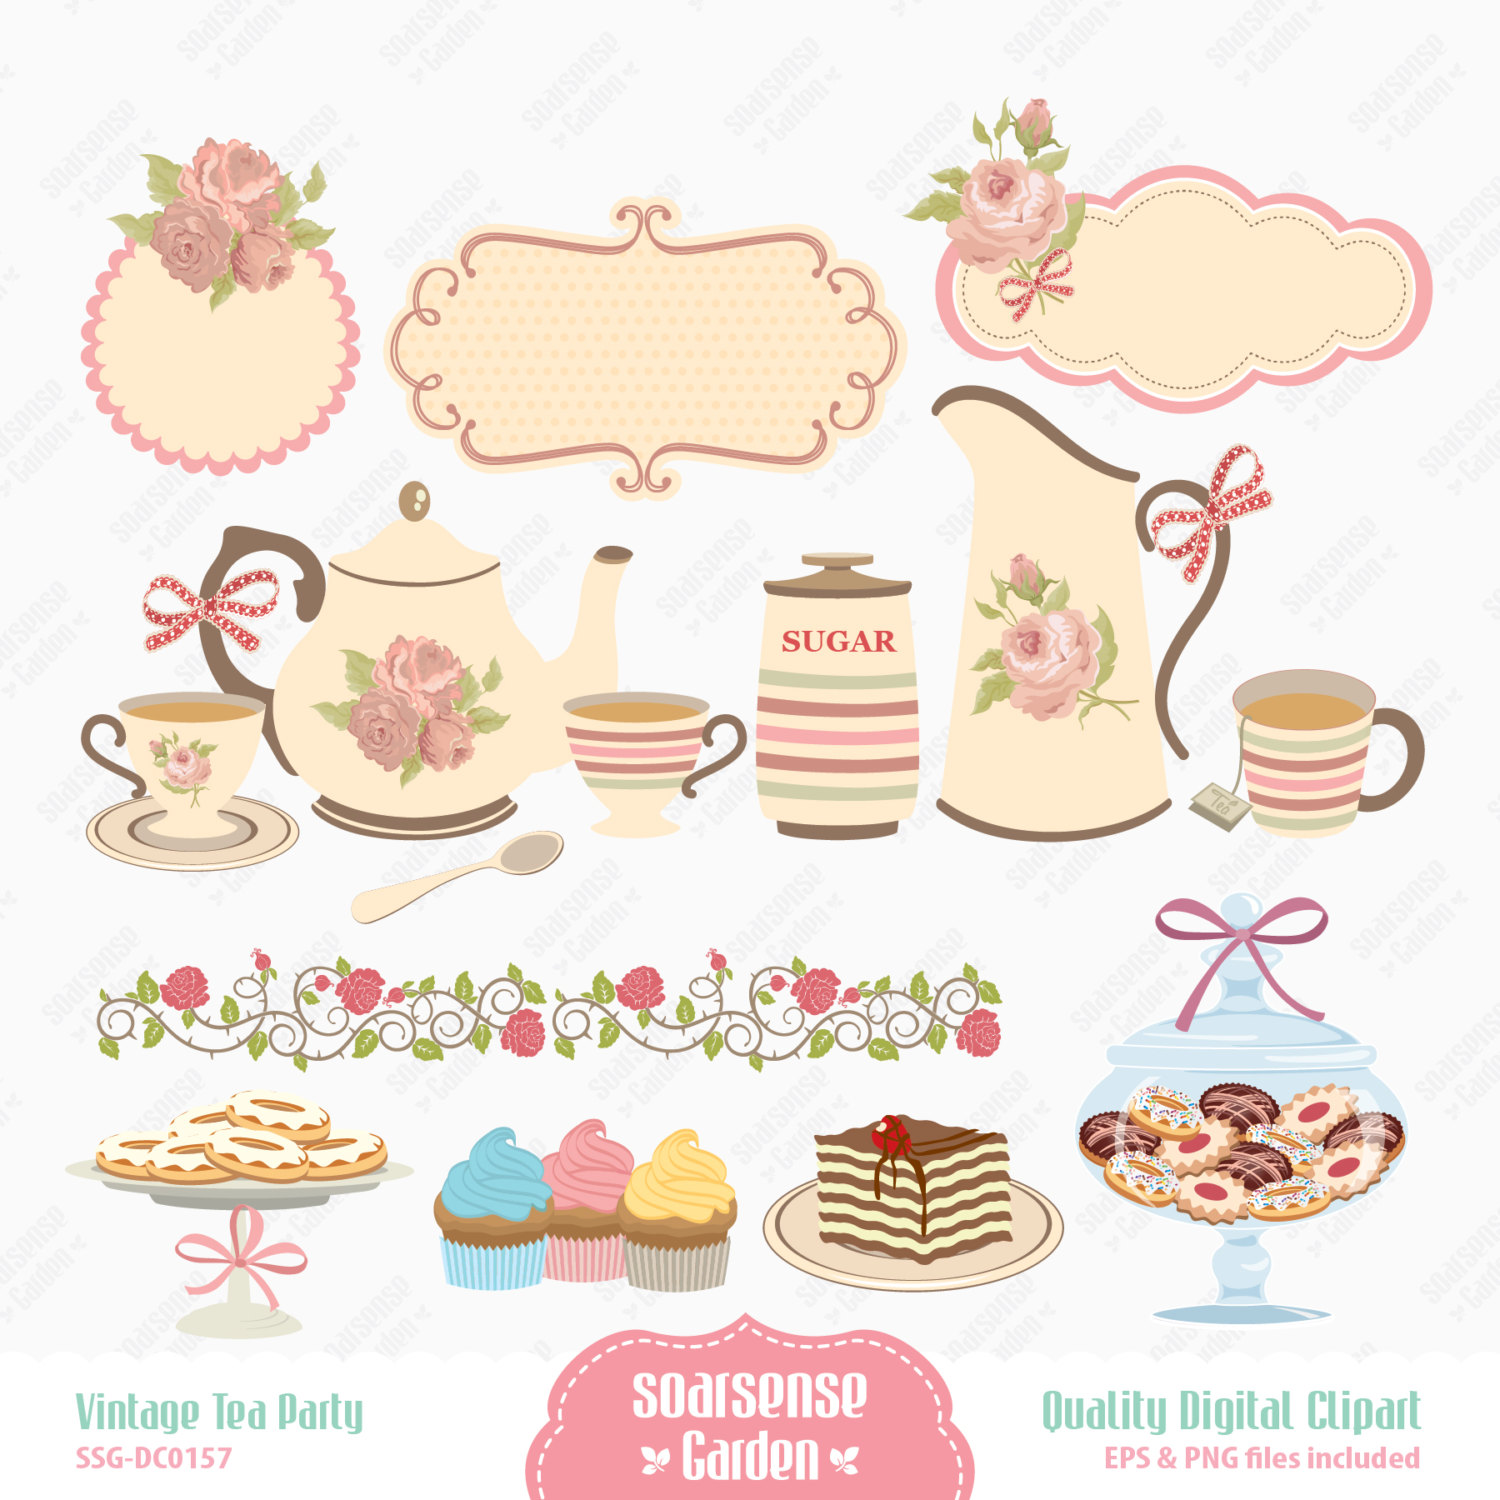 Afternoon Tea 101: Course Ord